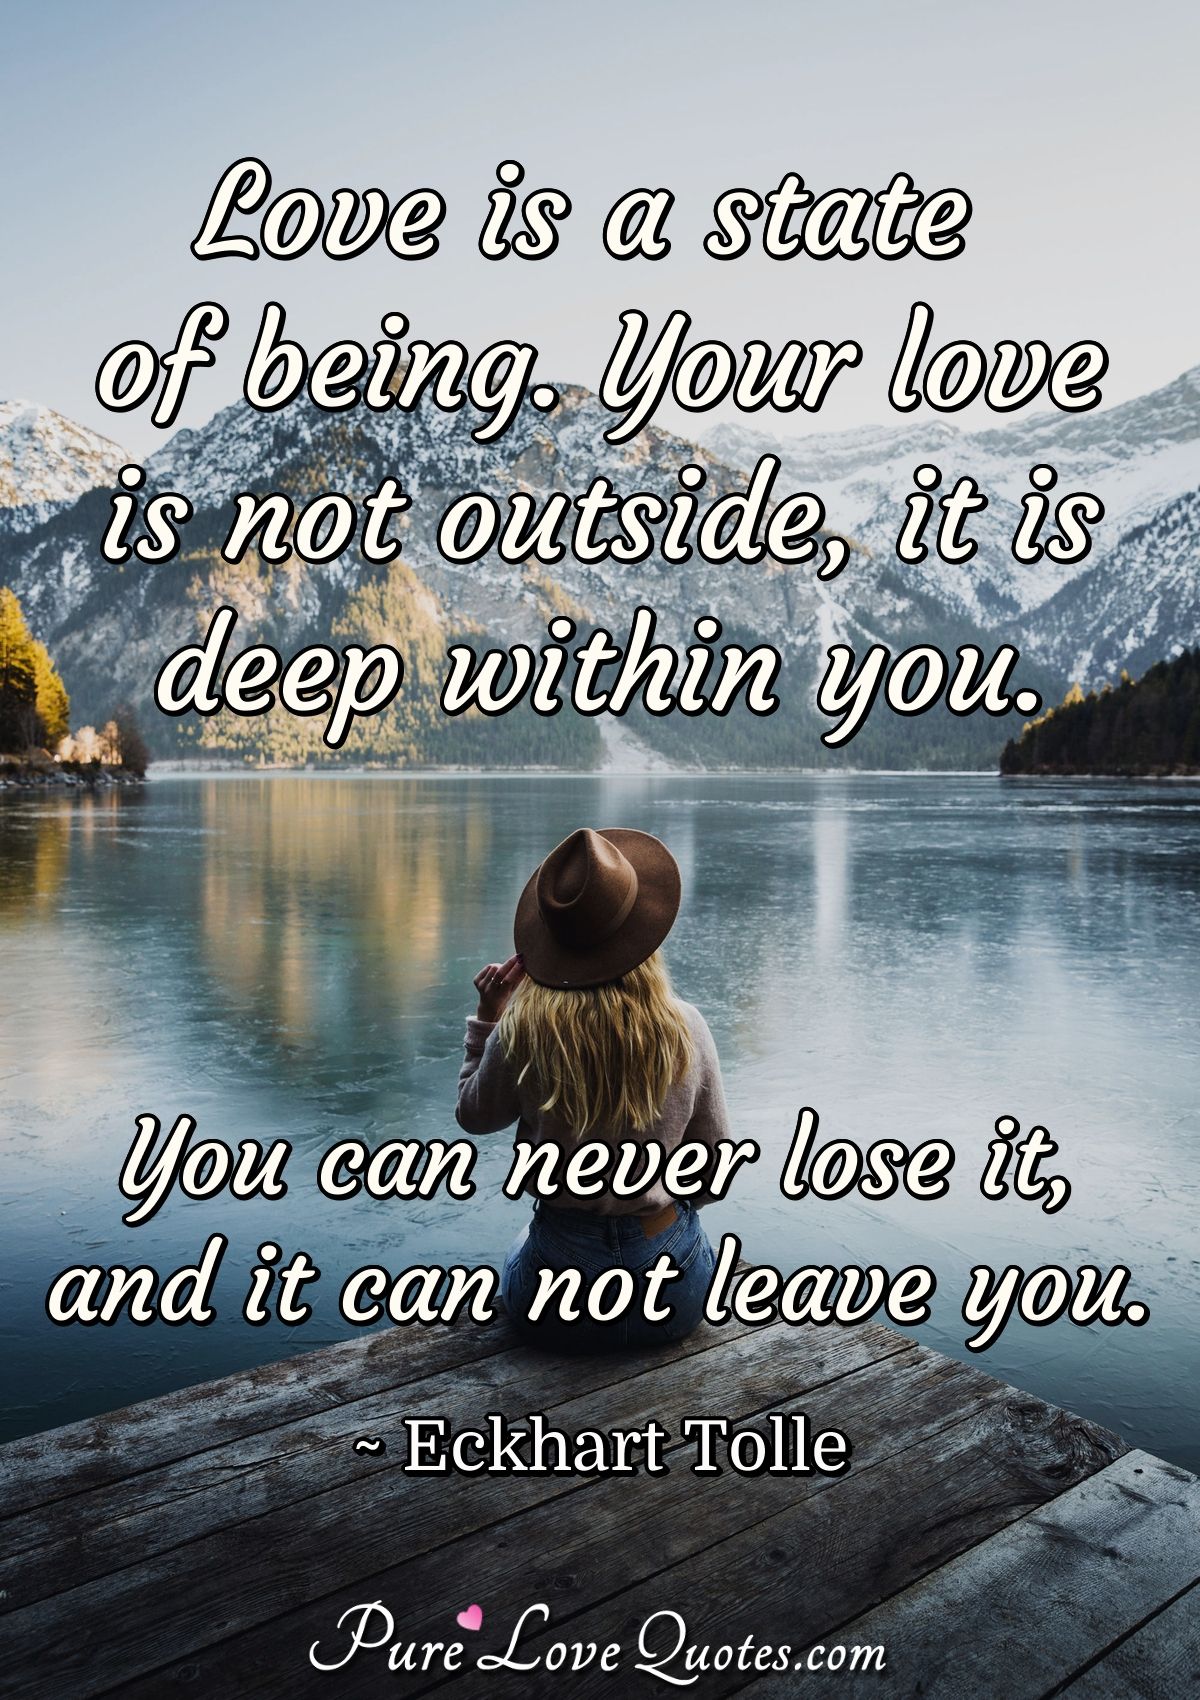 Love is a state of being. Your love is not outside, it is deep within you. You can never lose it, and it can not leave you. - Eckhart Tolle